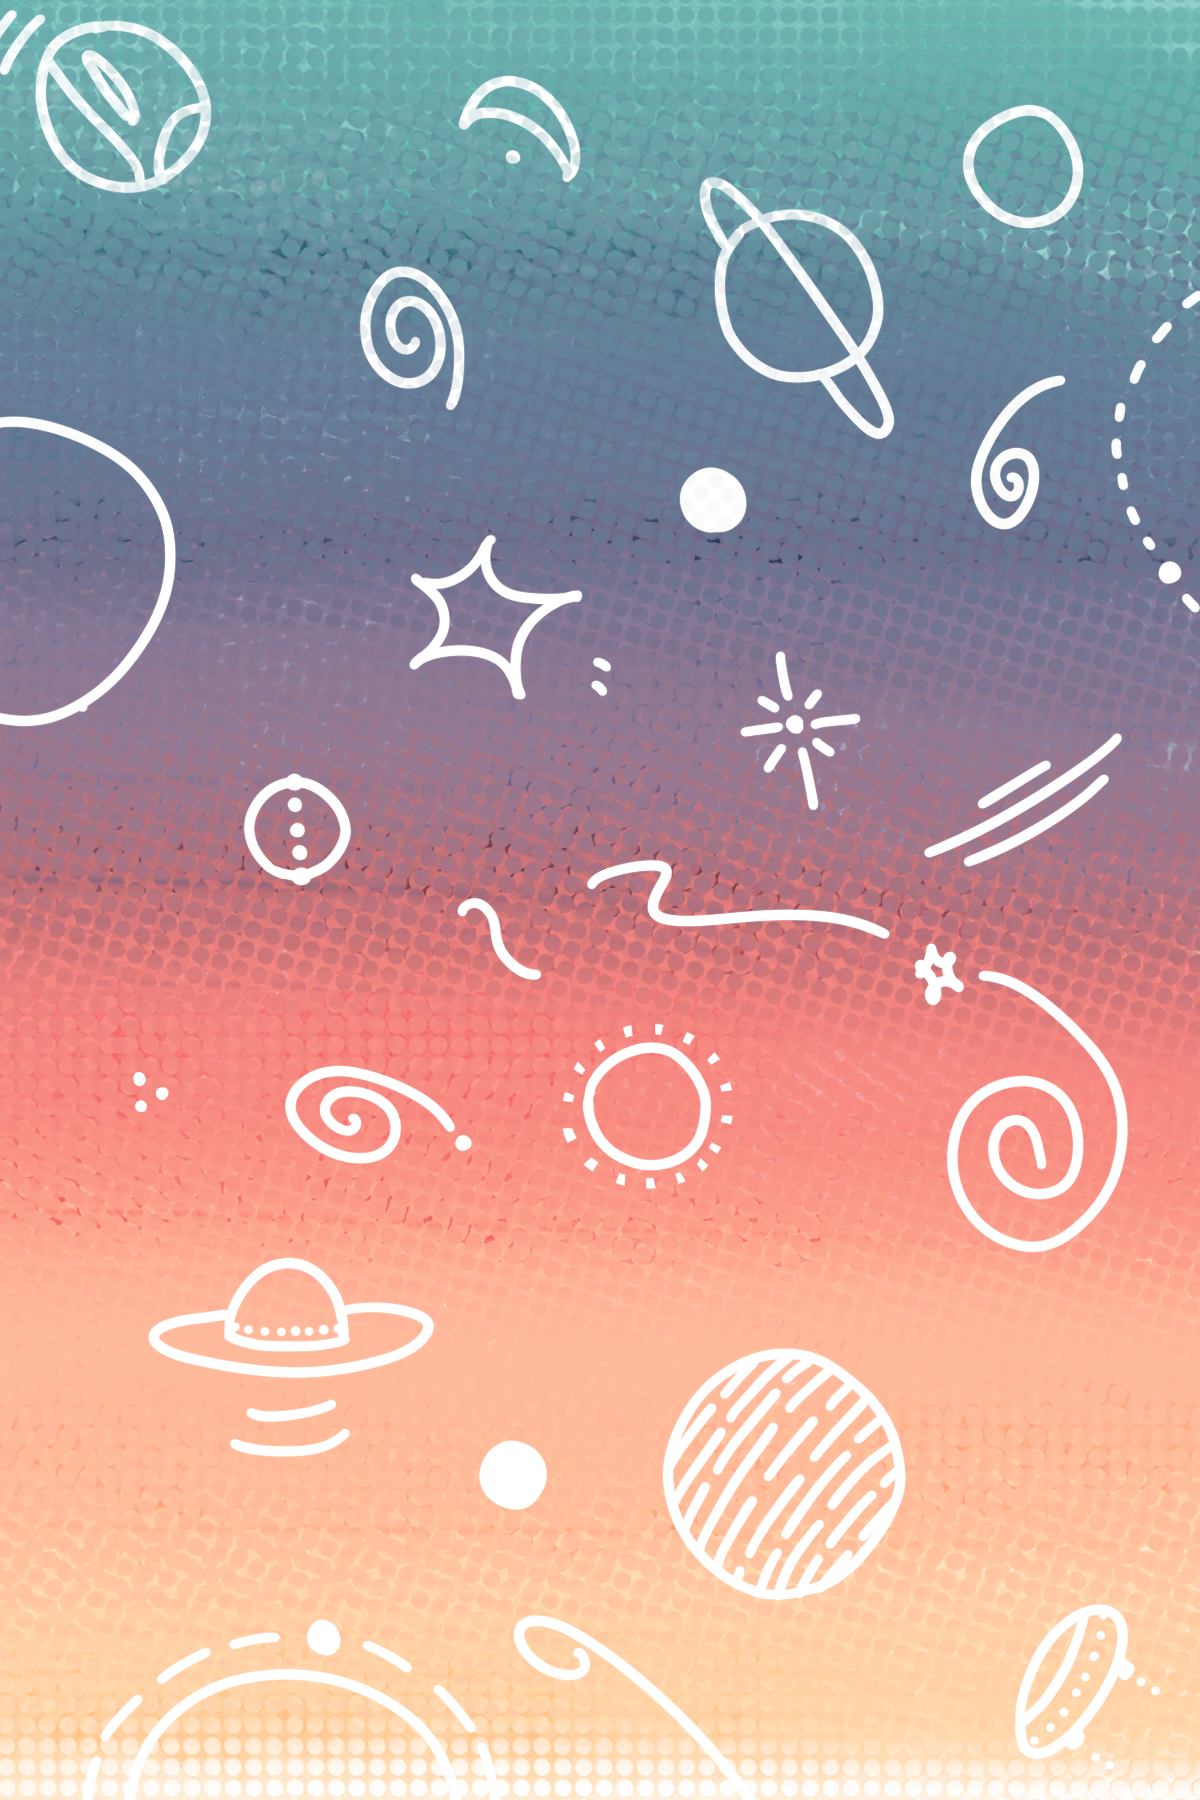 Brighten Up Your Space with Fun Doodle Backgrounds